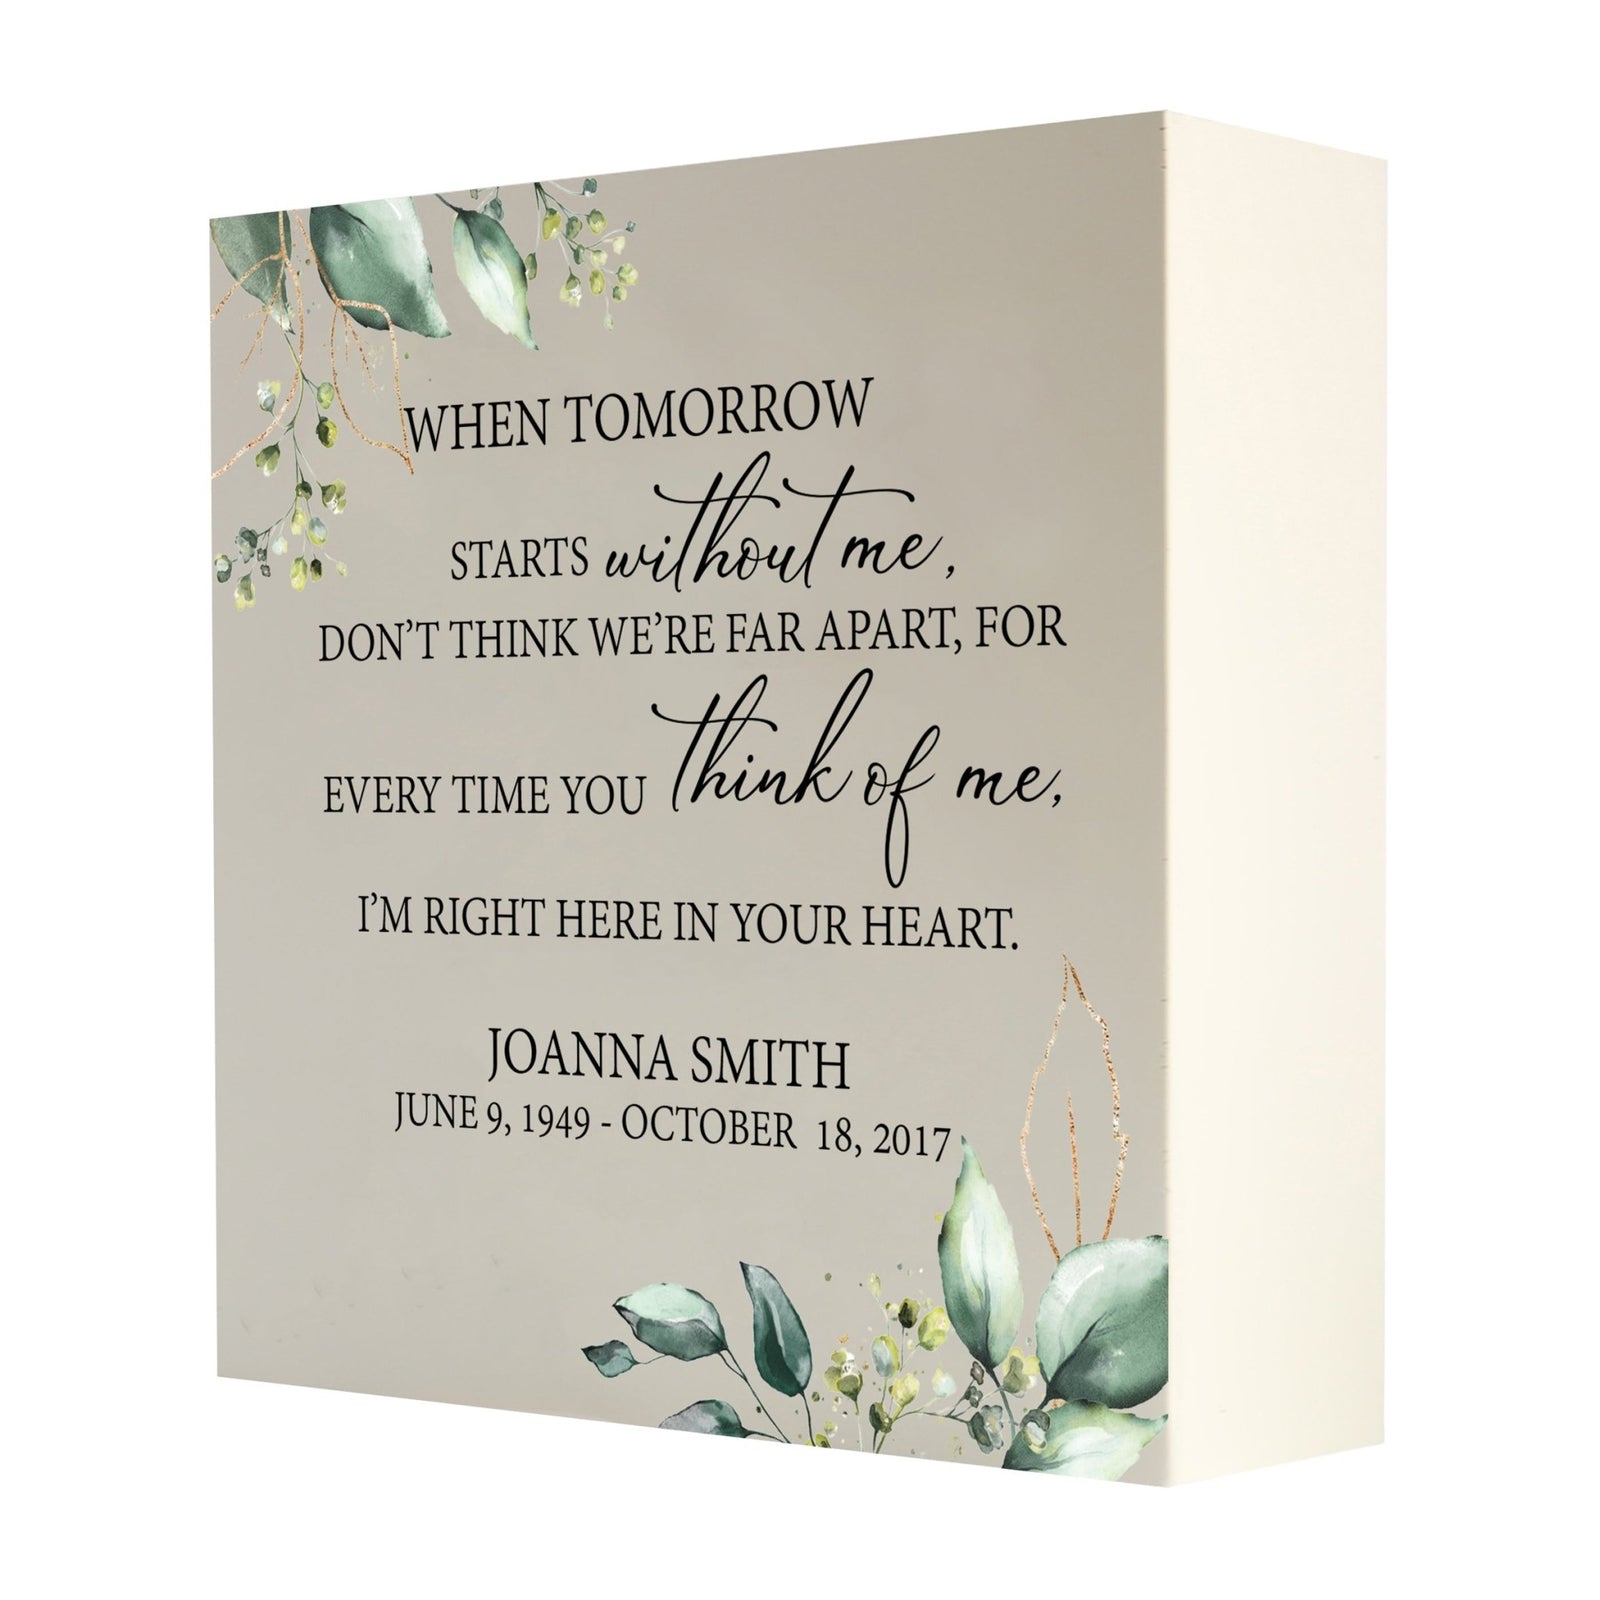 Personalized Modern Inspirational Memorial Wooden Shadow Box and Urn 10x10 holds 189 cu in of Human Ashes - When Tomorrow Starts (Ivory) - LifeSong Milestones